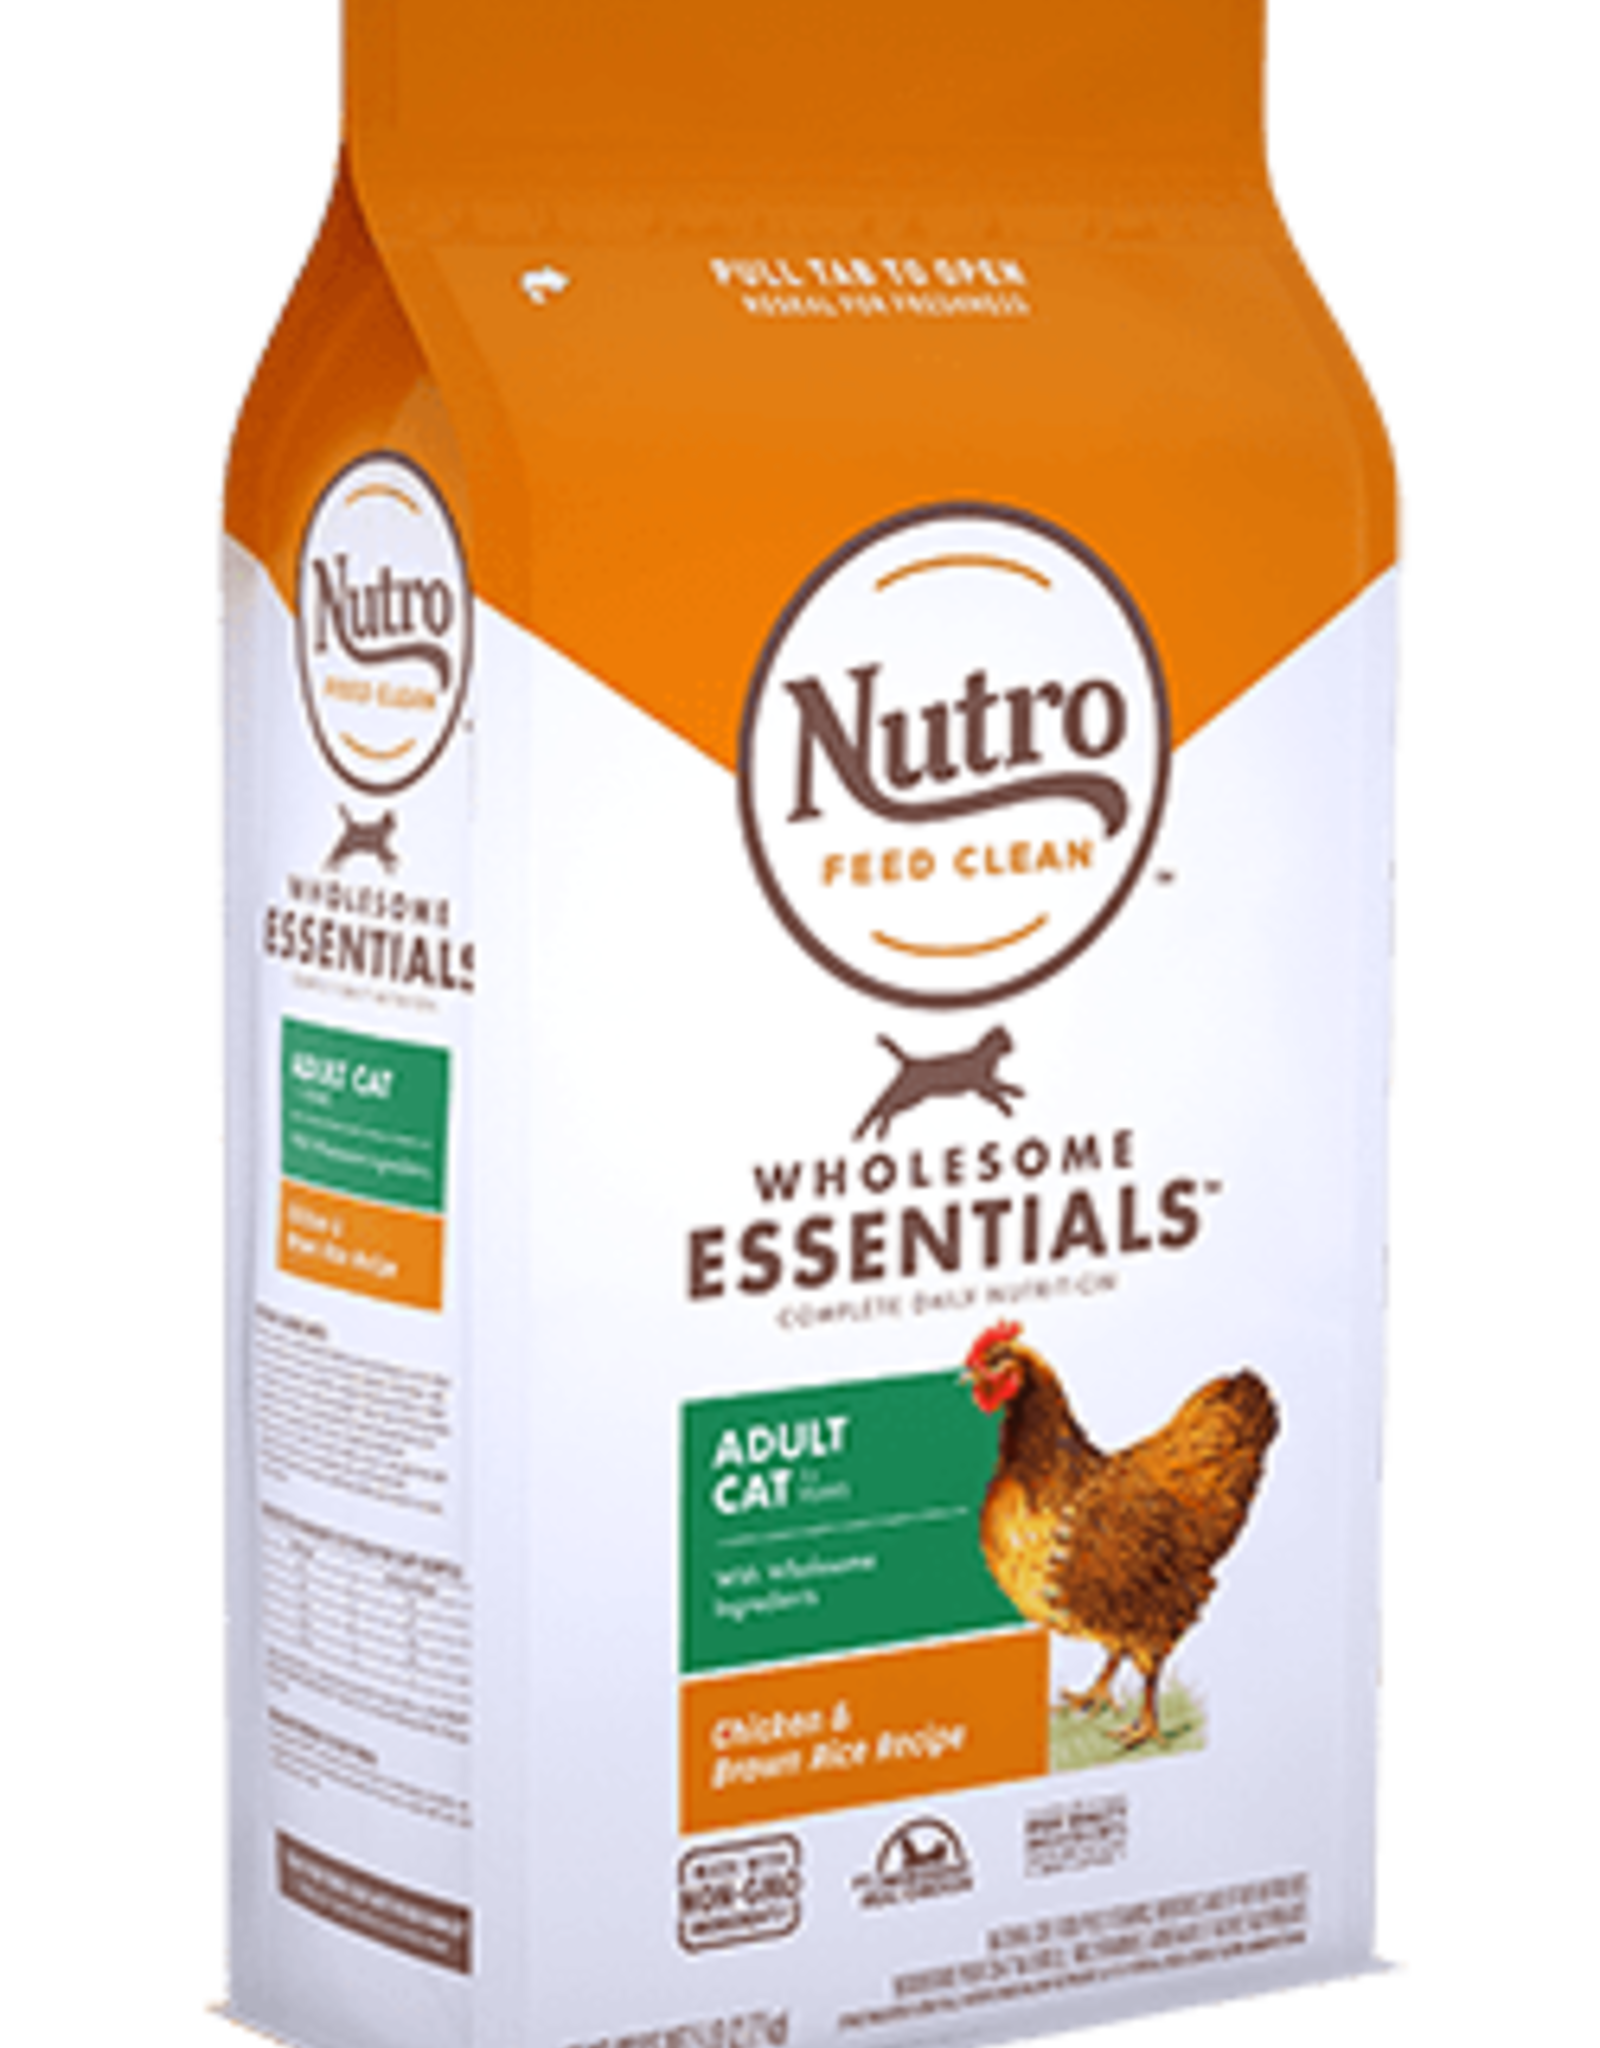 NUTRO PRODUCTS  INC. NUTRO WHOLESOME ESSENTIALS ADULT CAT CHICKEN 5LBS